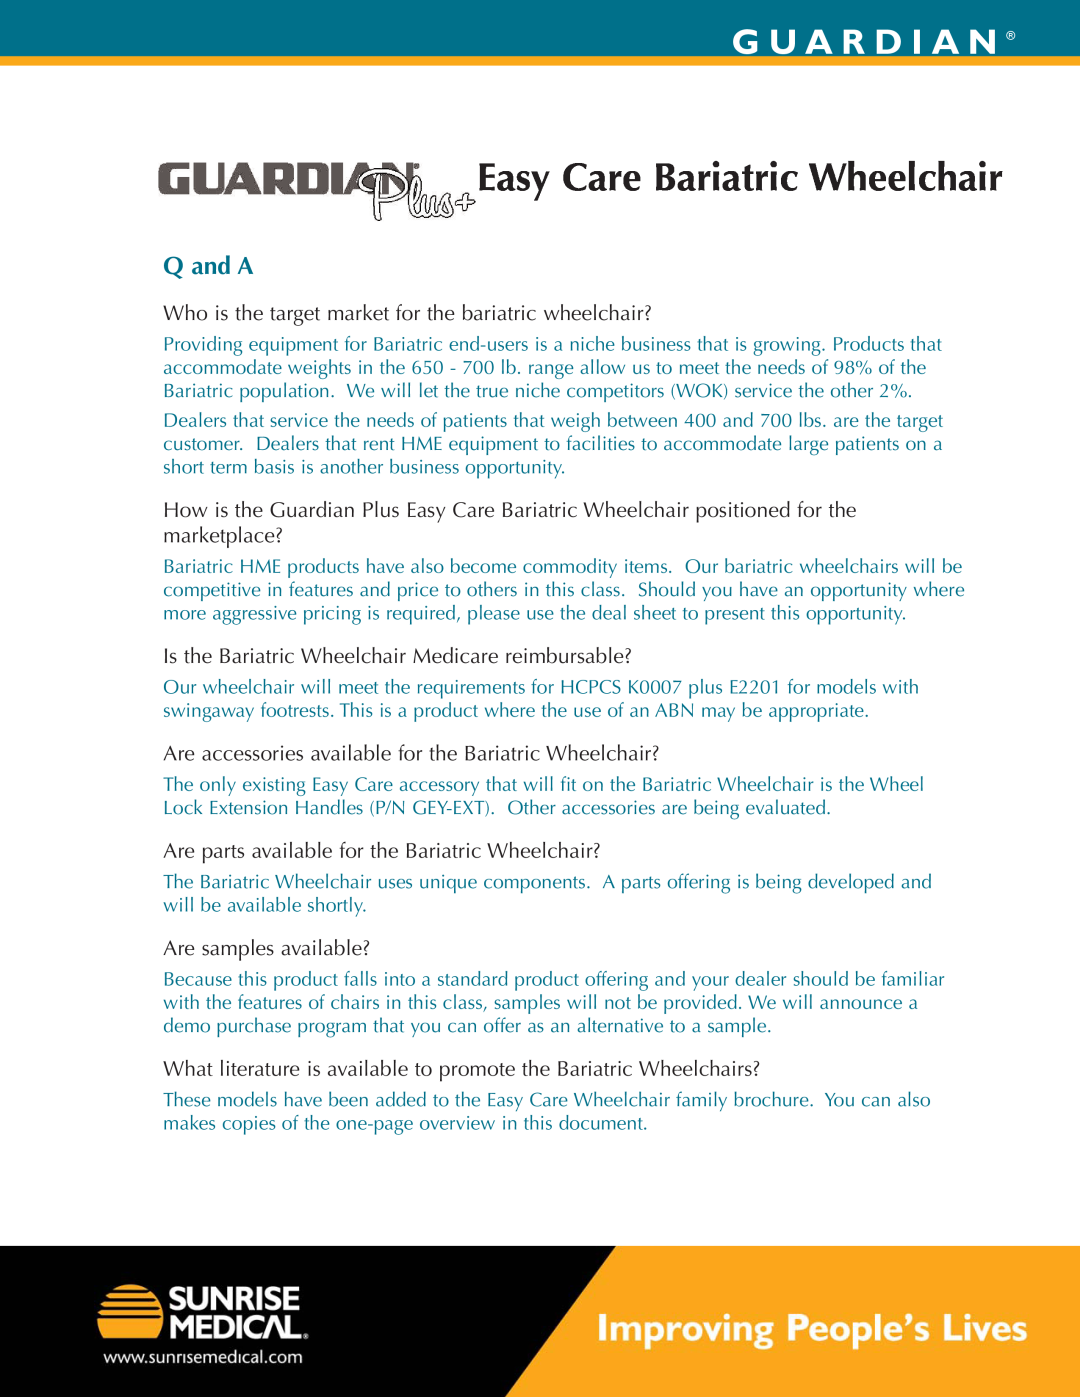 Sunrise Medical 2HD28RADPE Q and A, Guardian Easy Care Bariatric Wheelchair, G U A R D I A N, Are samples available? 